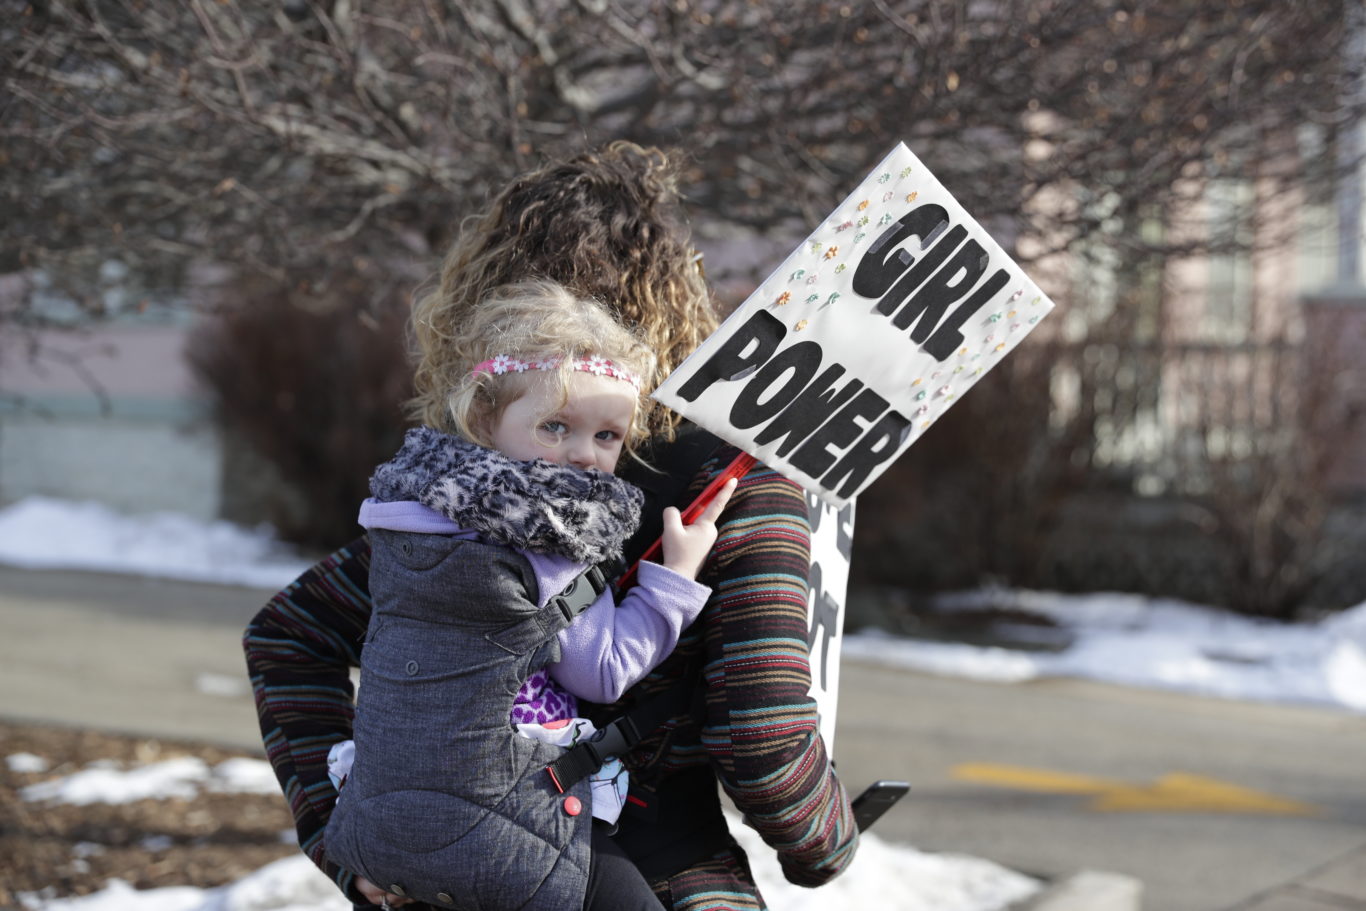 Peighton Letizia, 3, holds a "girl power" sign during a march in Wisconsin, US (Sarah Kloepping/AP)